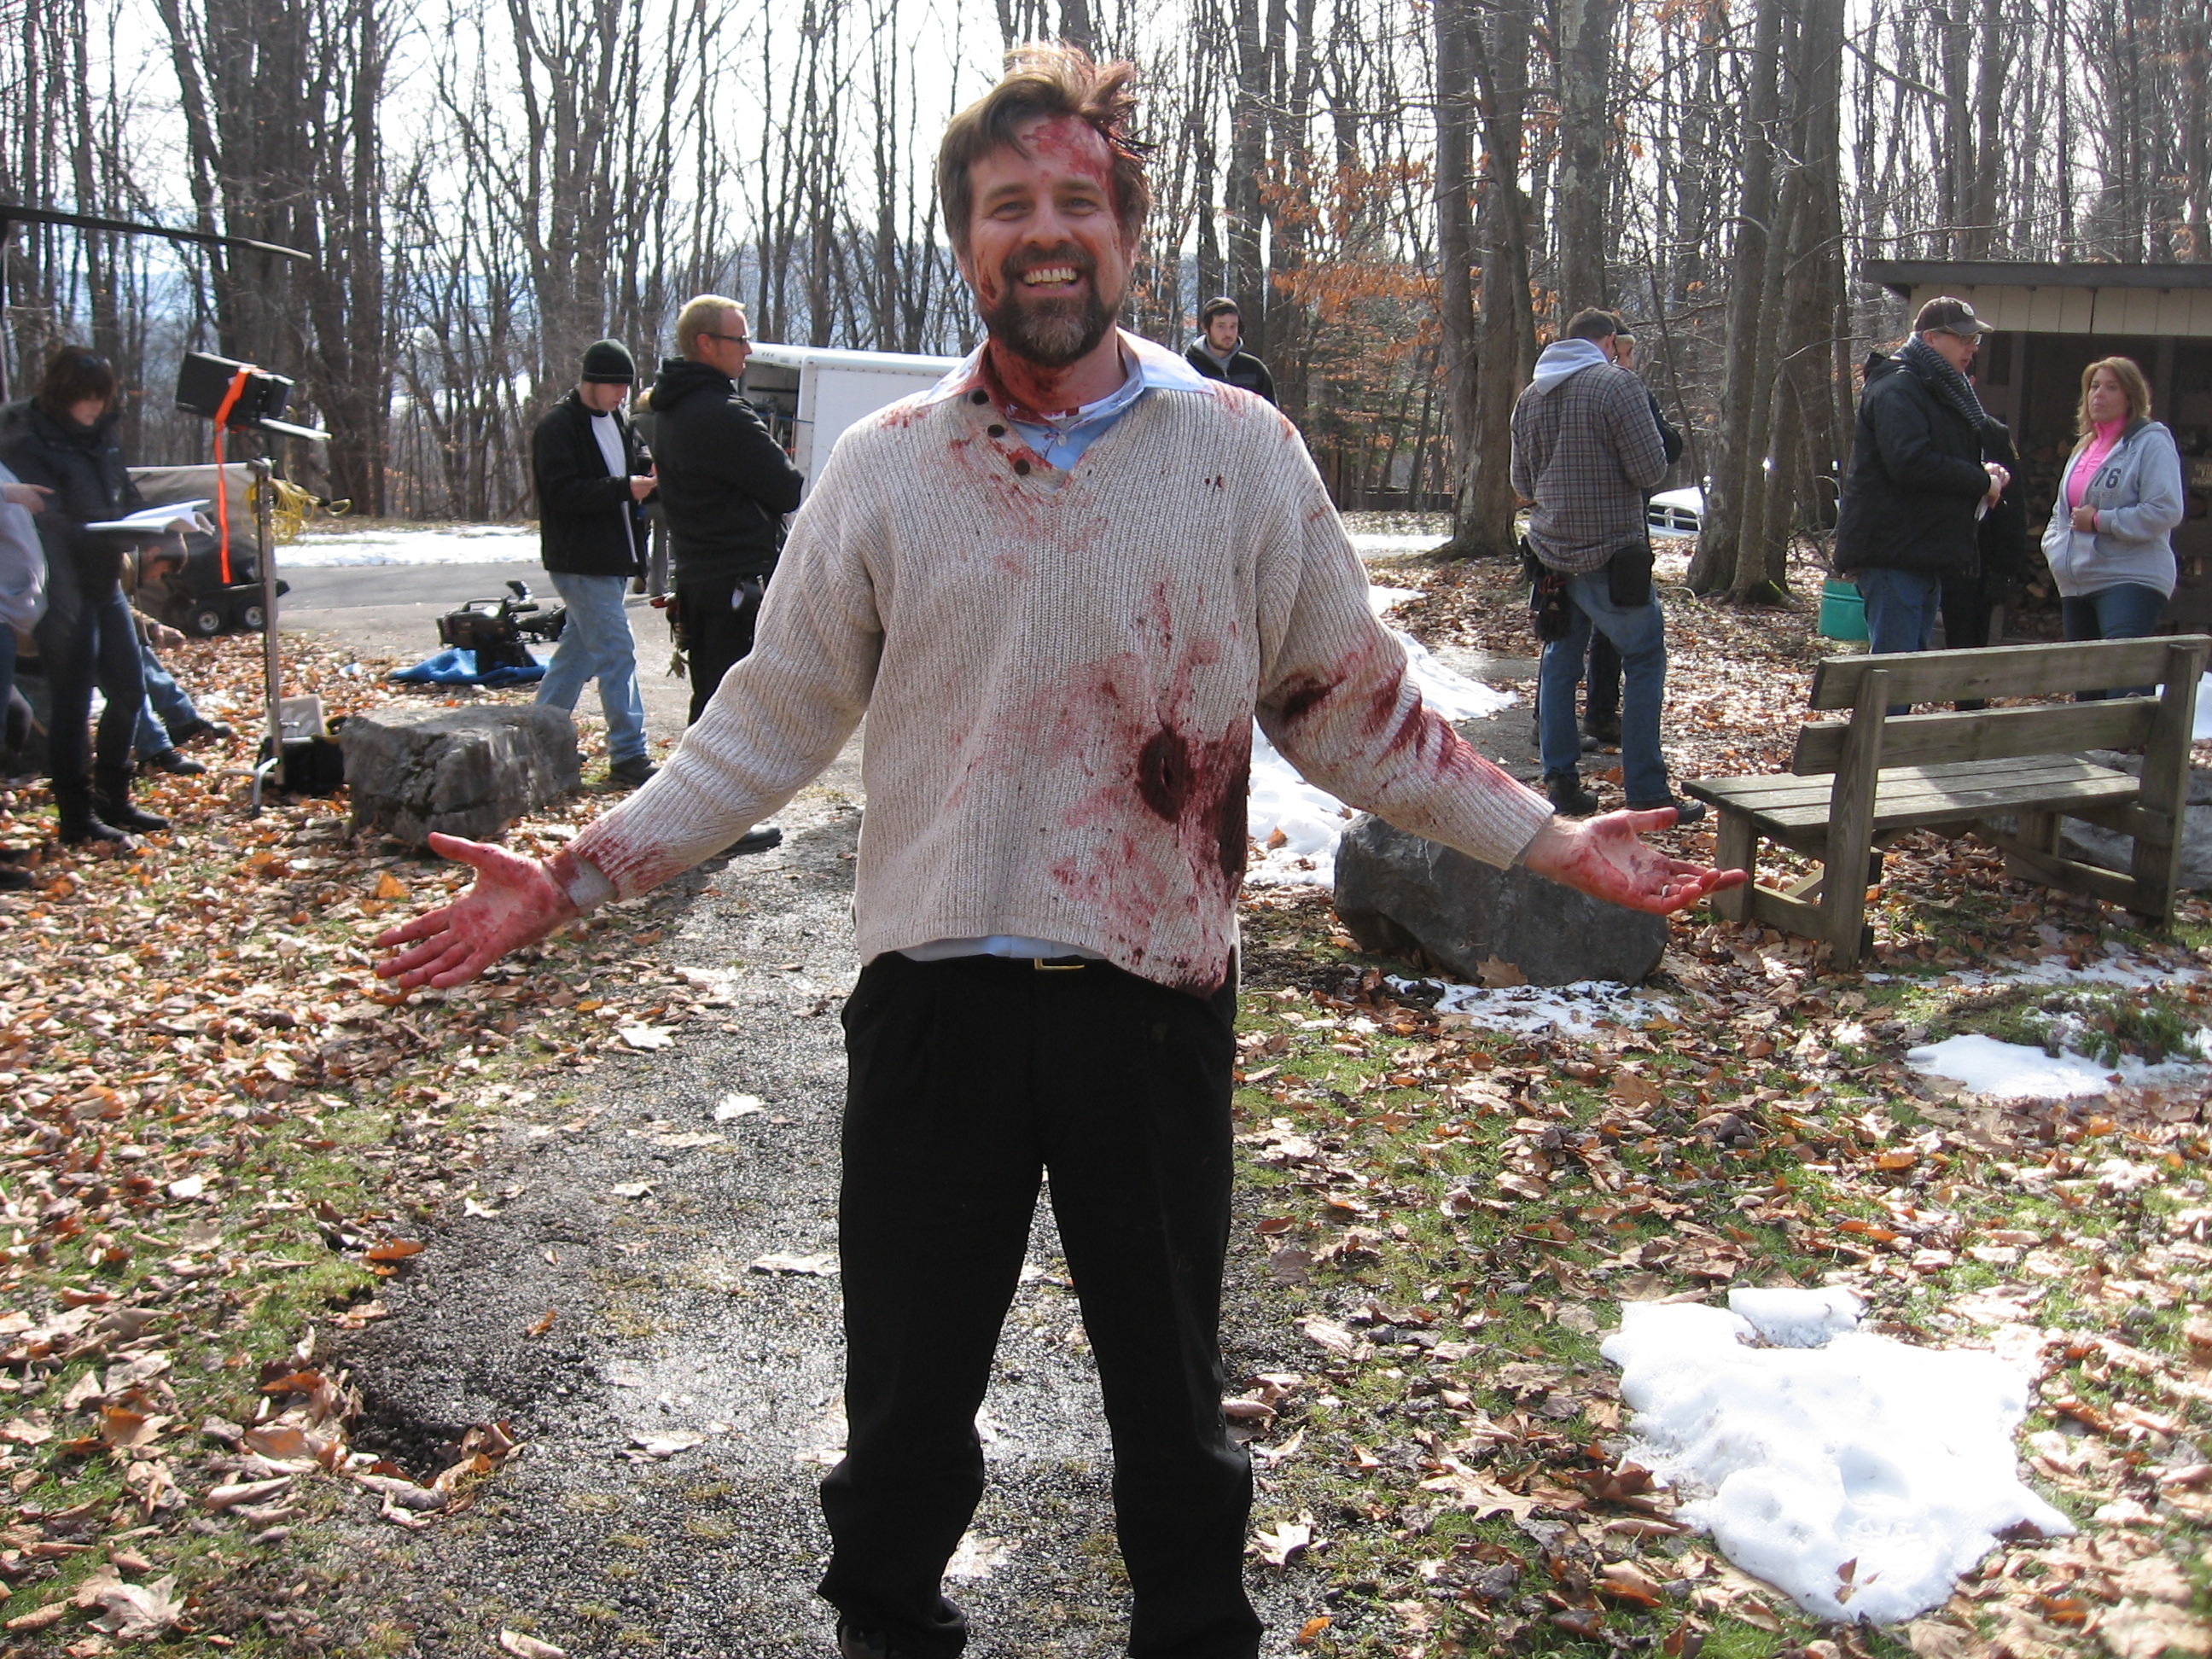 Scott is a bloody mess on the set of M2 Pictures ICE COLD KILLERS. Nov. 2012